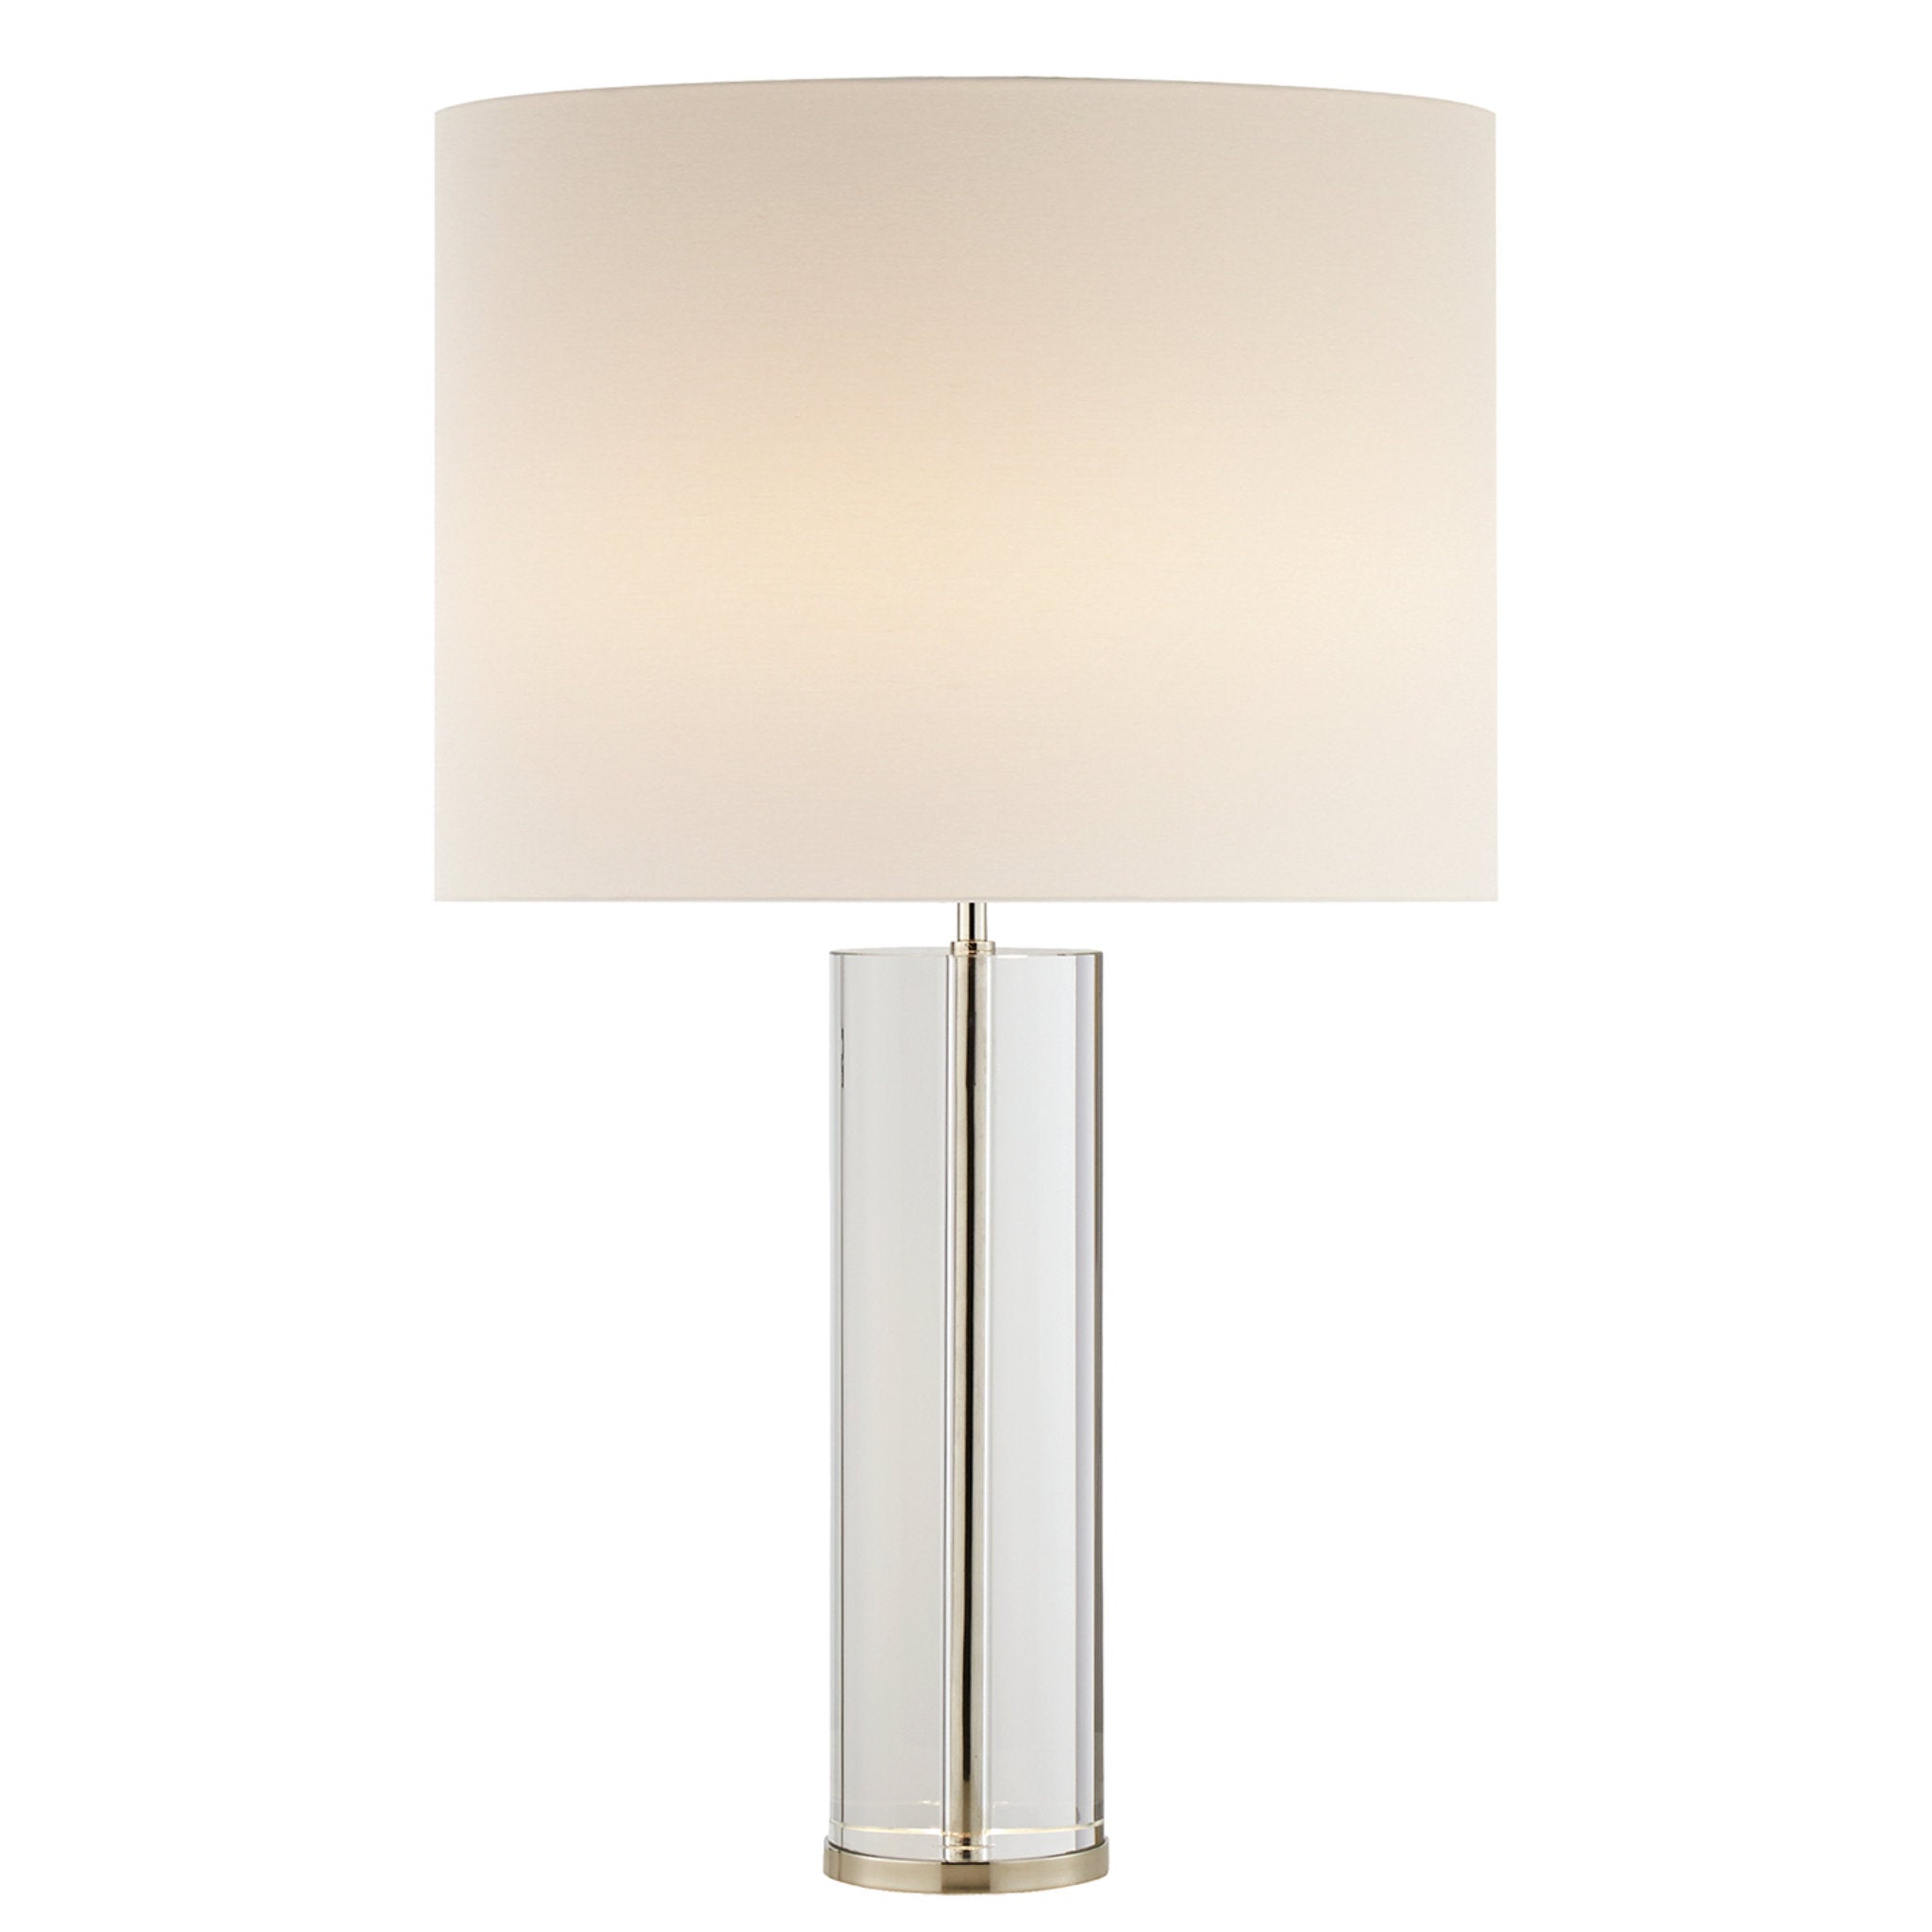 AERIN Lineham Table Lamp in Crystal and Polished Nickel with Linen Shade